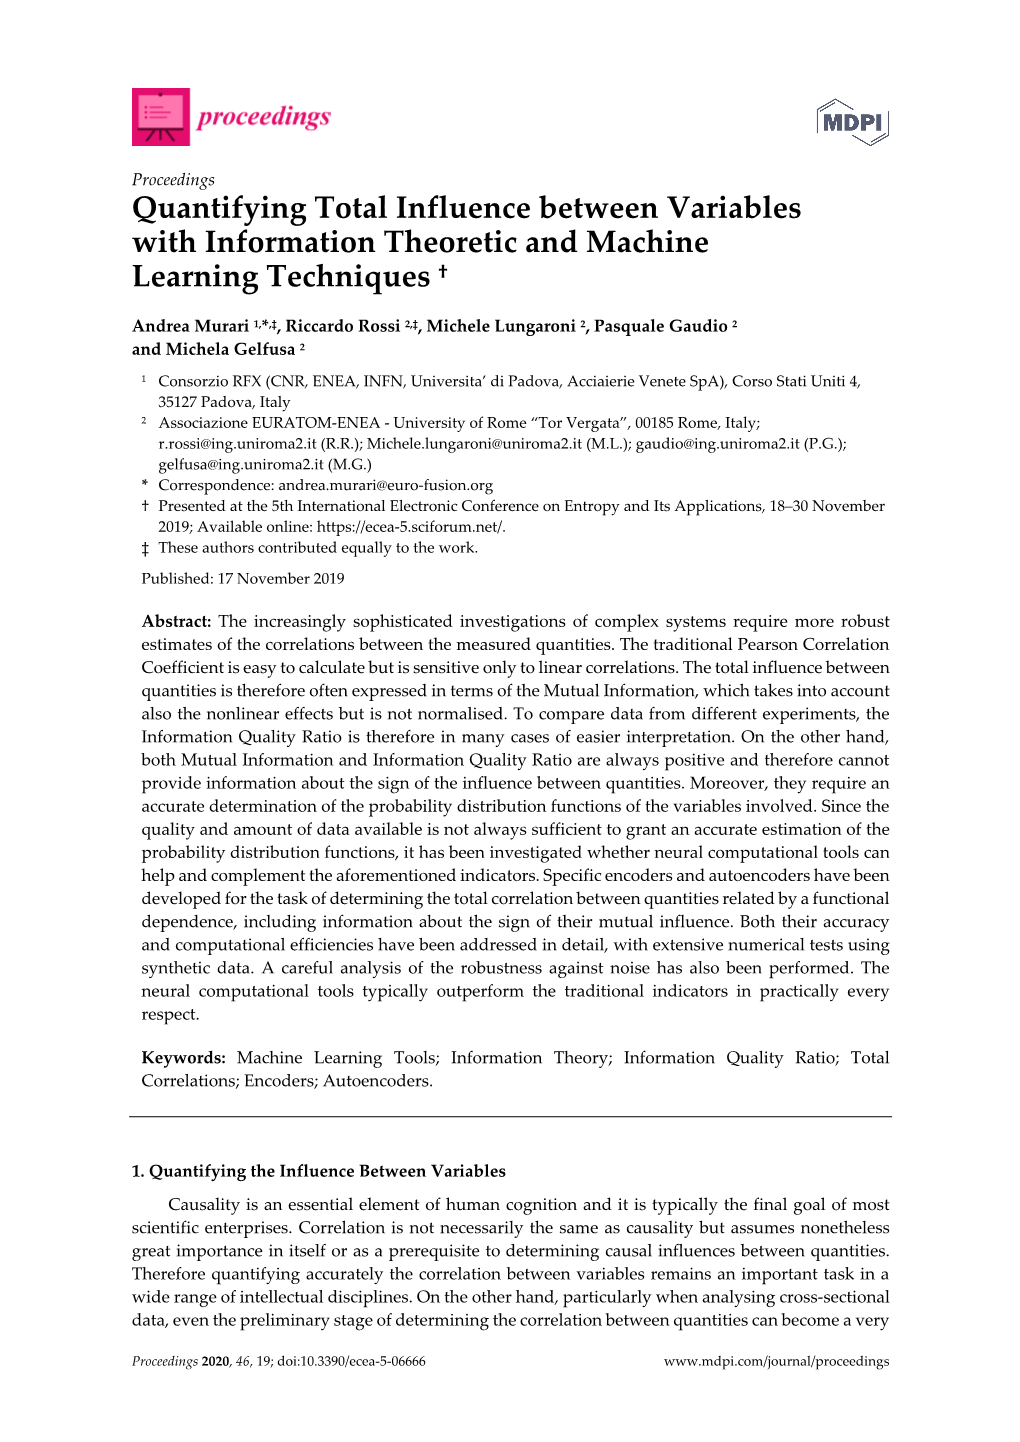 Quantifying Total Influence Between Variables with Information Theoretic and Machine Learning Techniques †